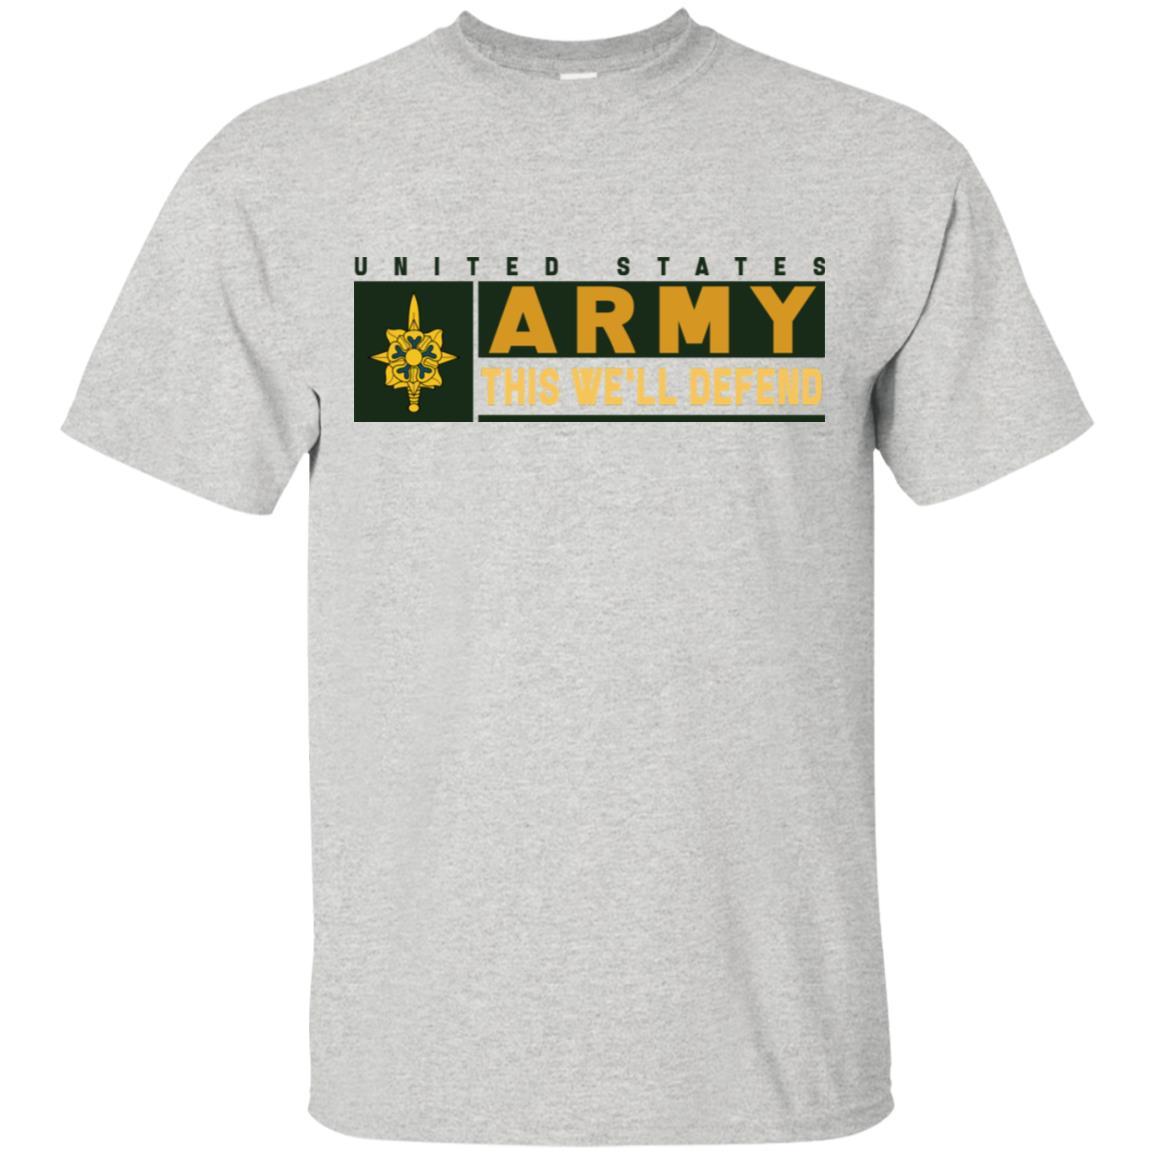 US Army Military Intelligence Branch- This We'll Defend T-Shirt On Front For Men-TShirt-Army-Veterans Nation